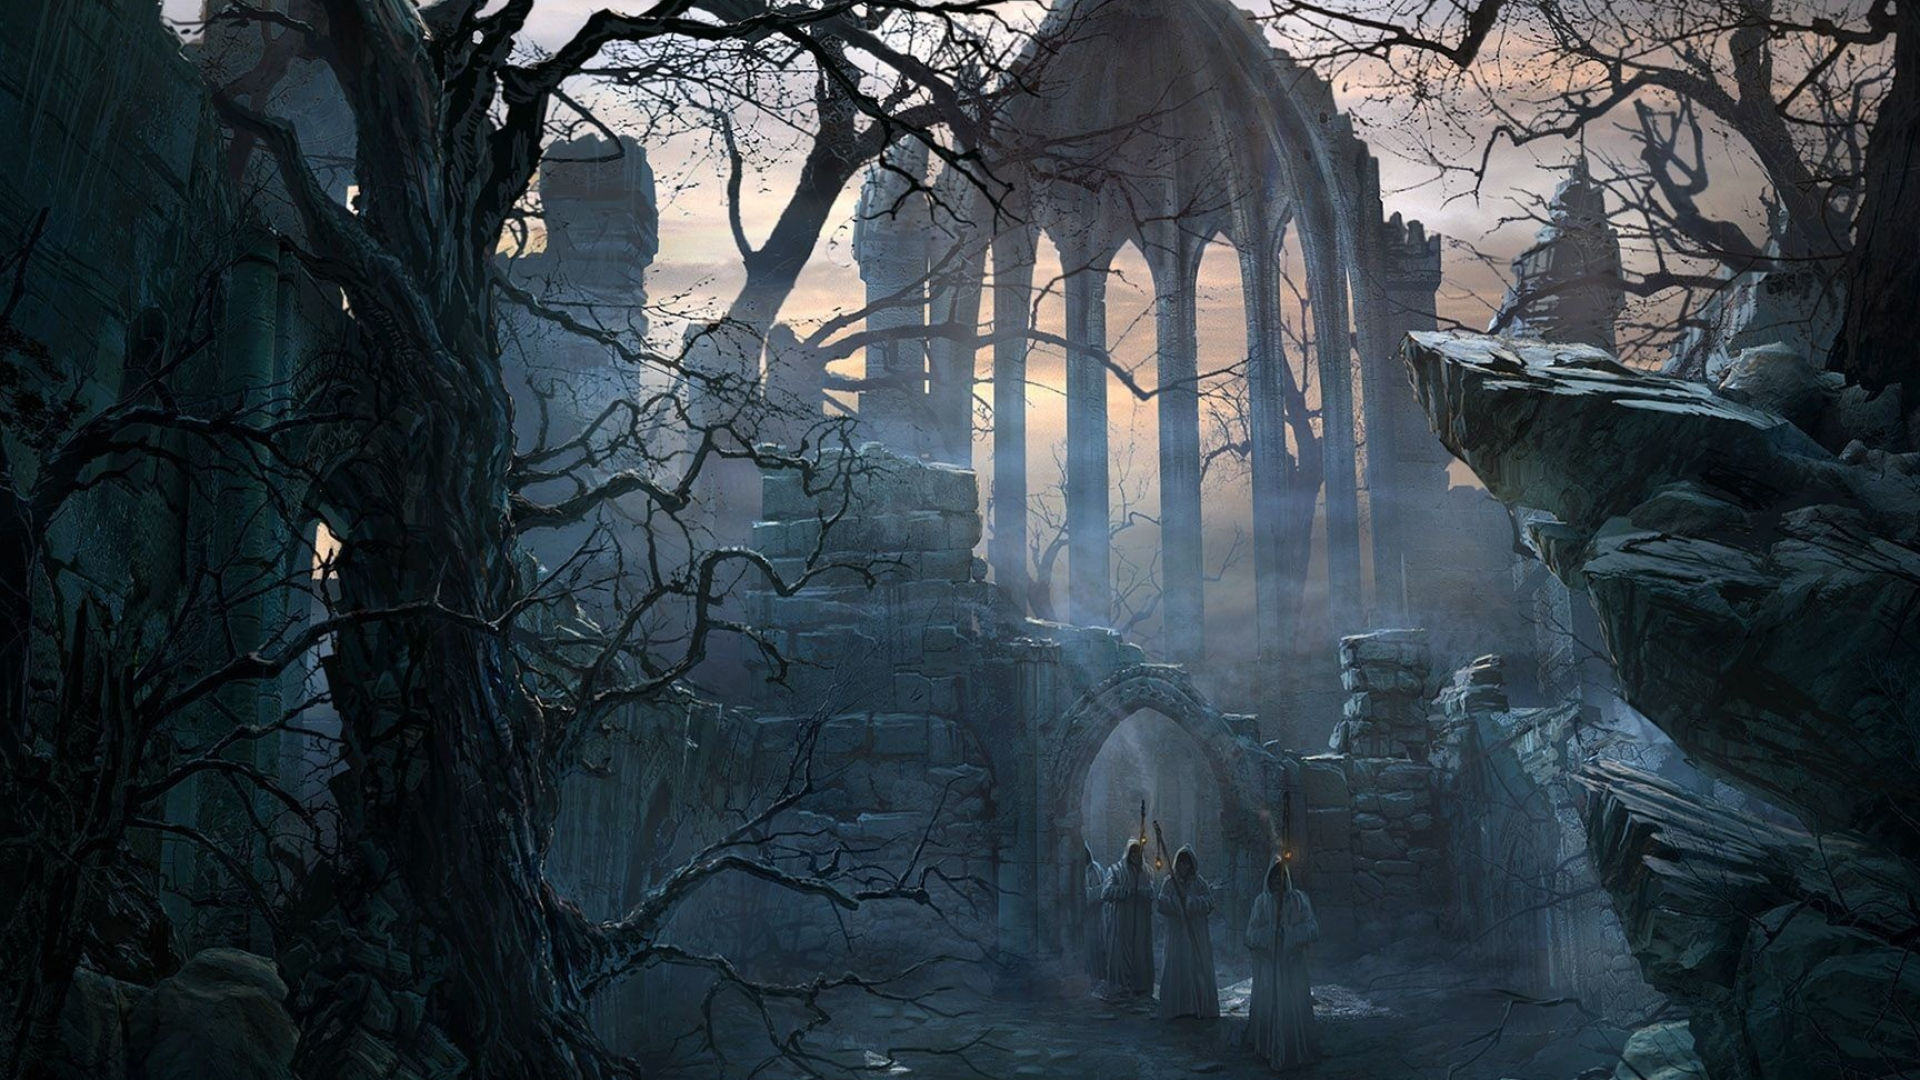 Gothic Art: Dark ruined temple, Monks, Abandoned place, Fantasy architecture. 1920x1080 Full HD Wallpaper.